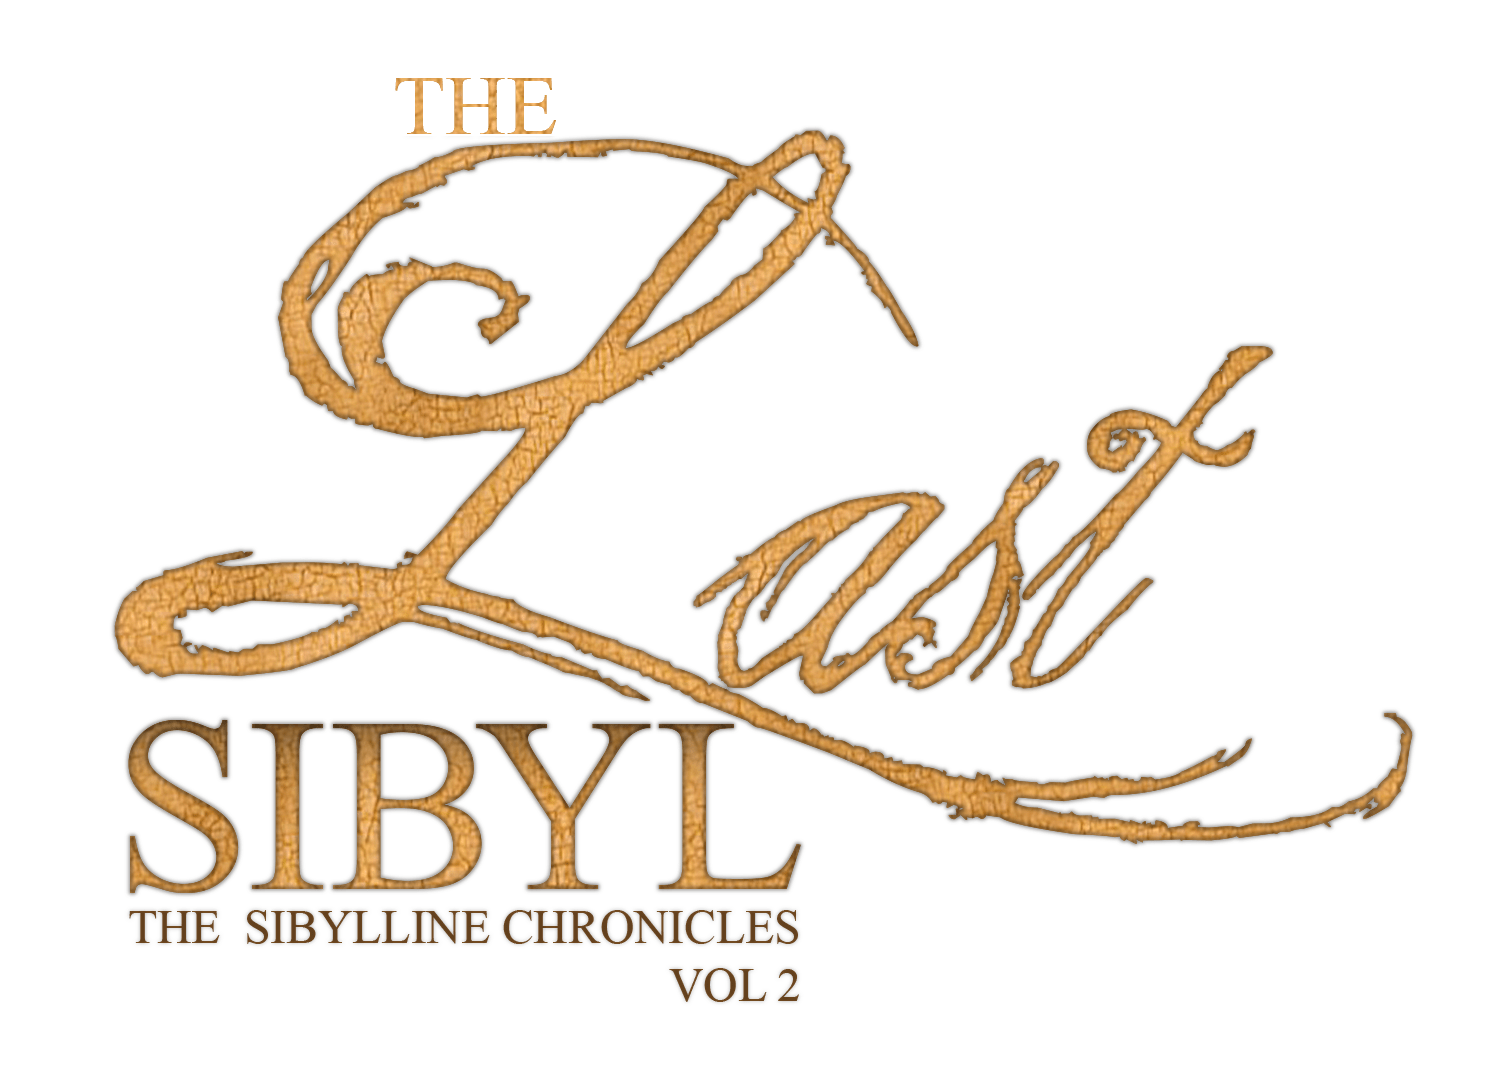 //thesibyllinechronicles.com/wp-content/uploads/2023/05/theLASTsybil.png